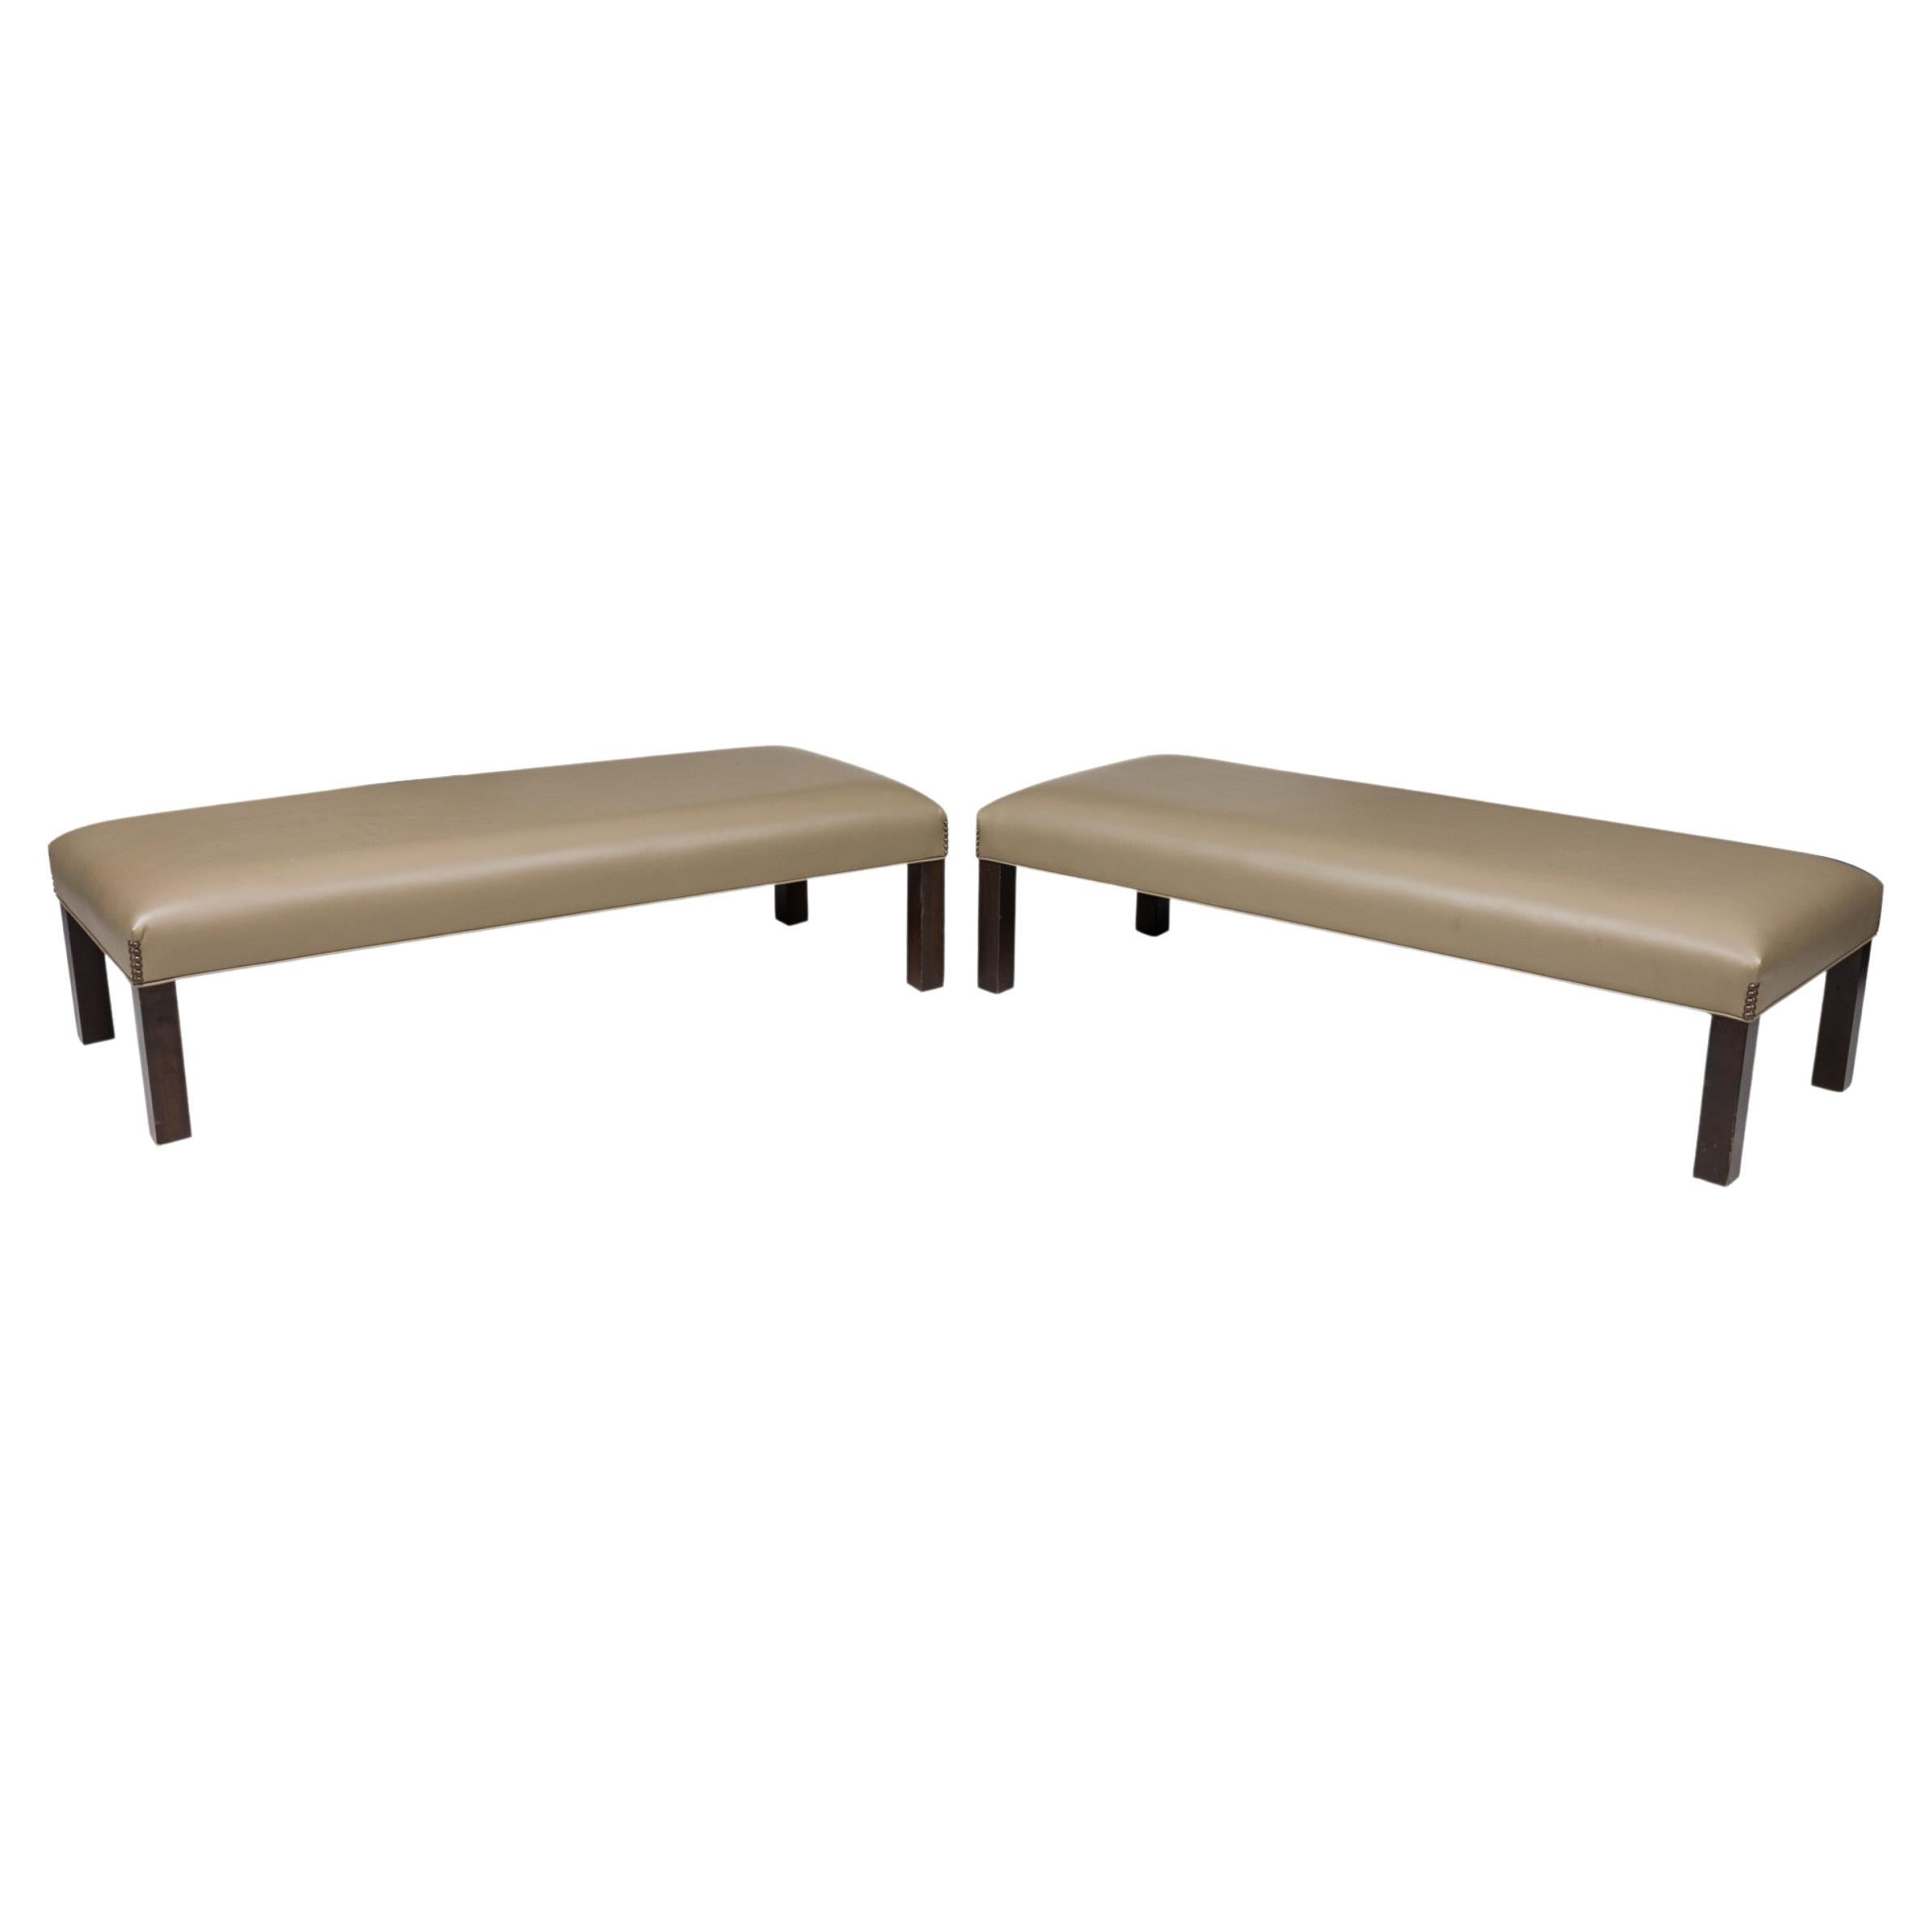 Pair of Contemporary Taupe Leather Upholstered Benches For Sale